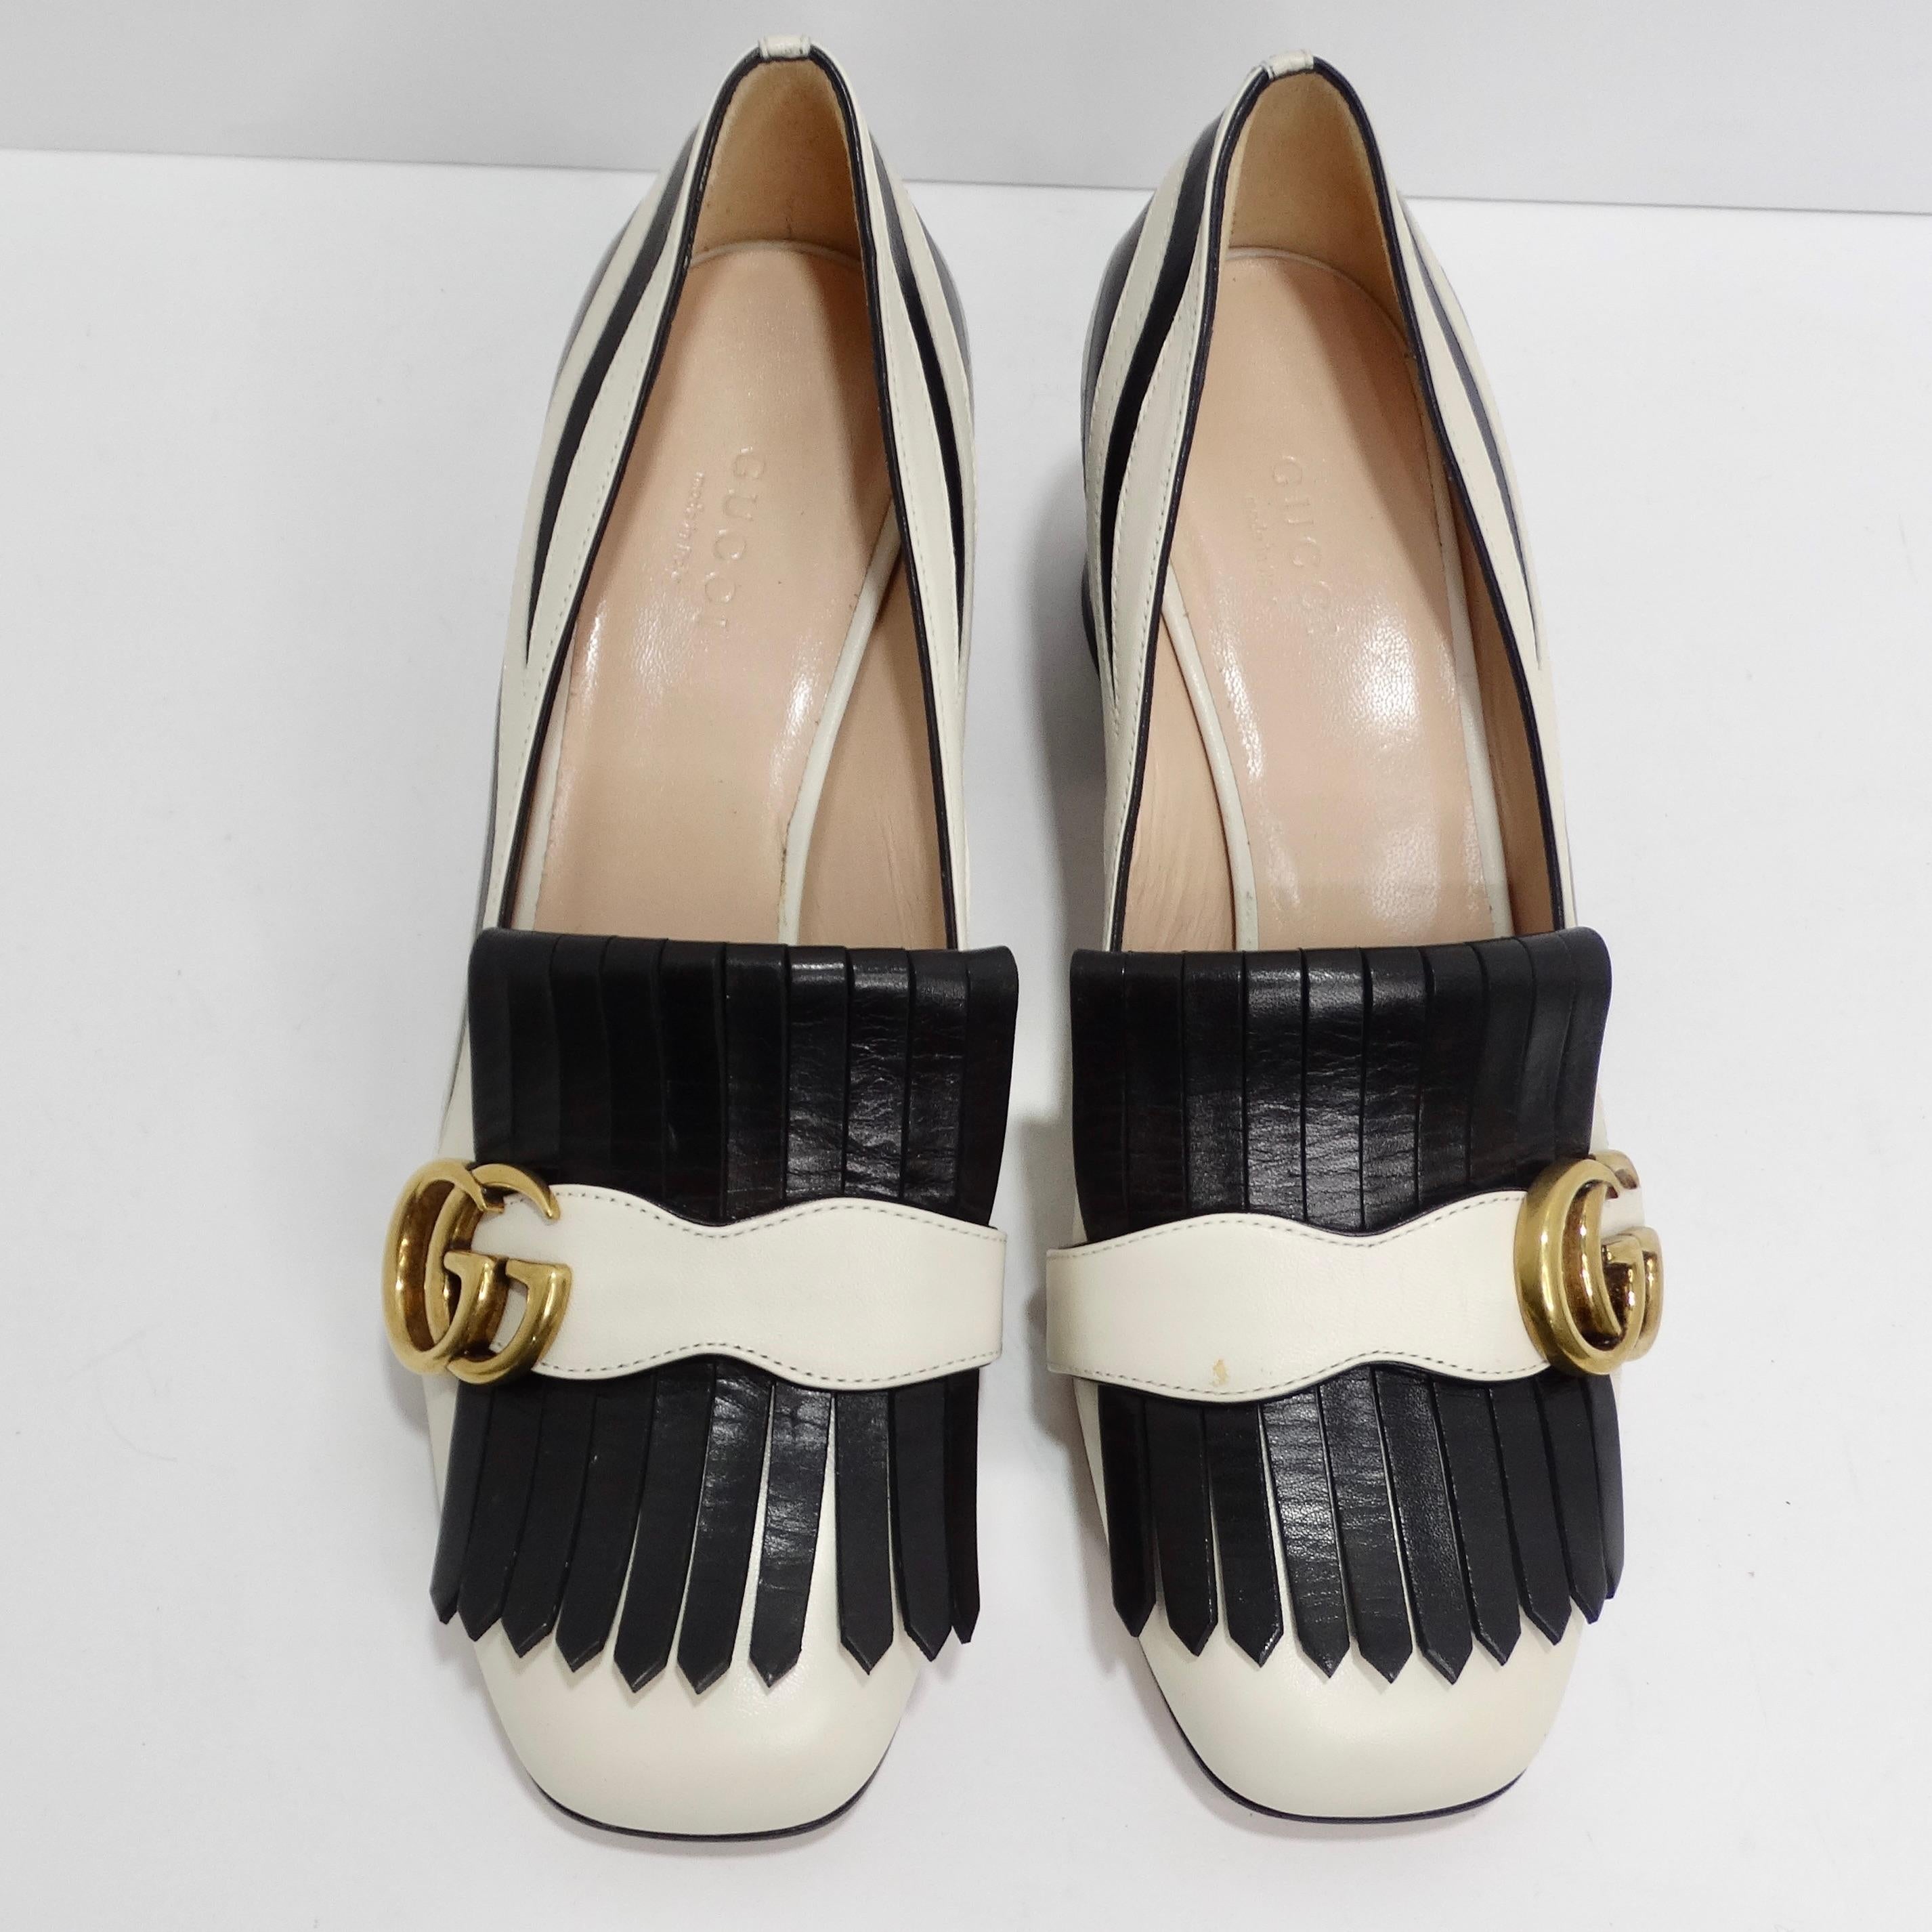 Gucci Marmont Fringe Leather 55mm Loafer For Sale 1